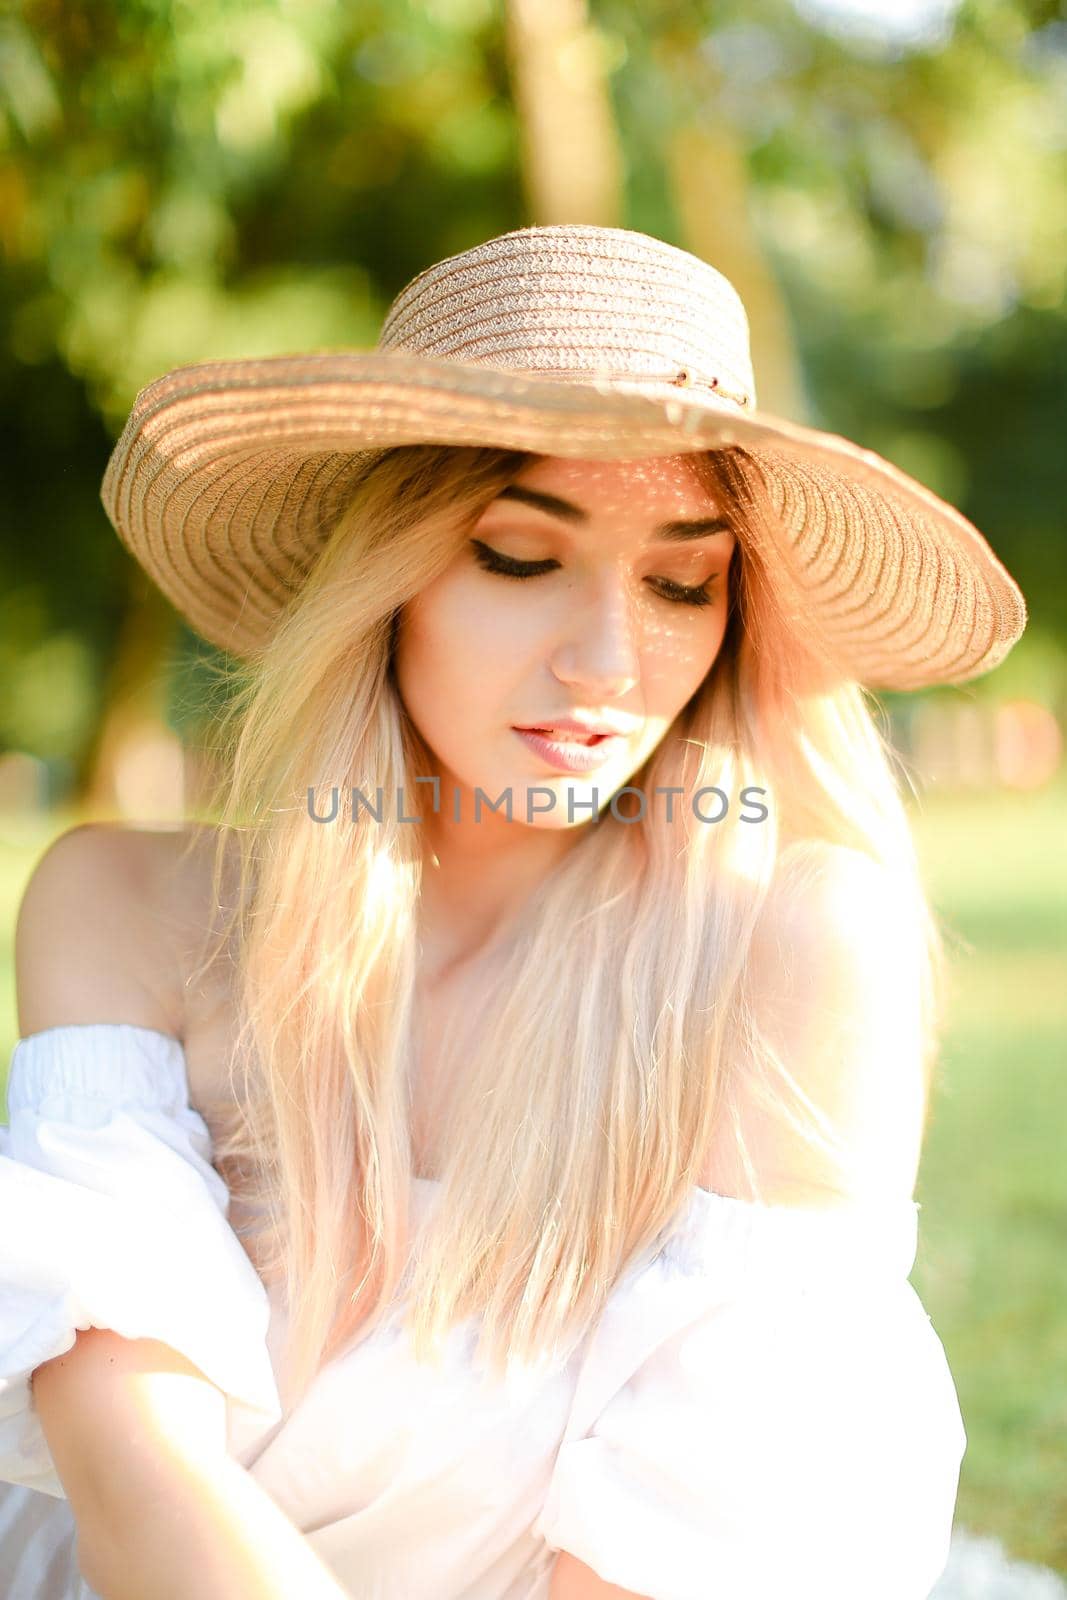 Portrait of young blonde caucasian girl in hat. Concept of beauty, female person and summer fashion.